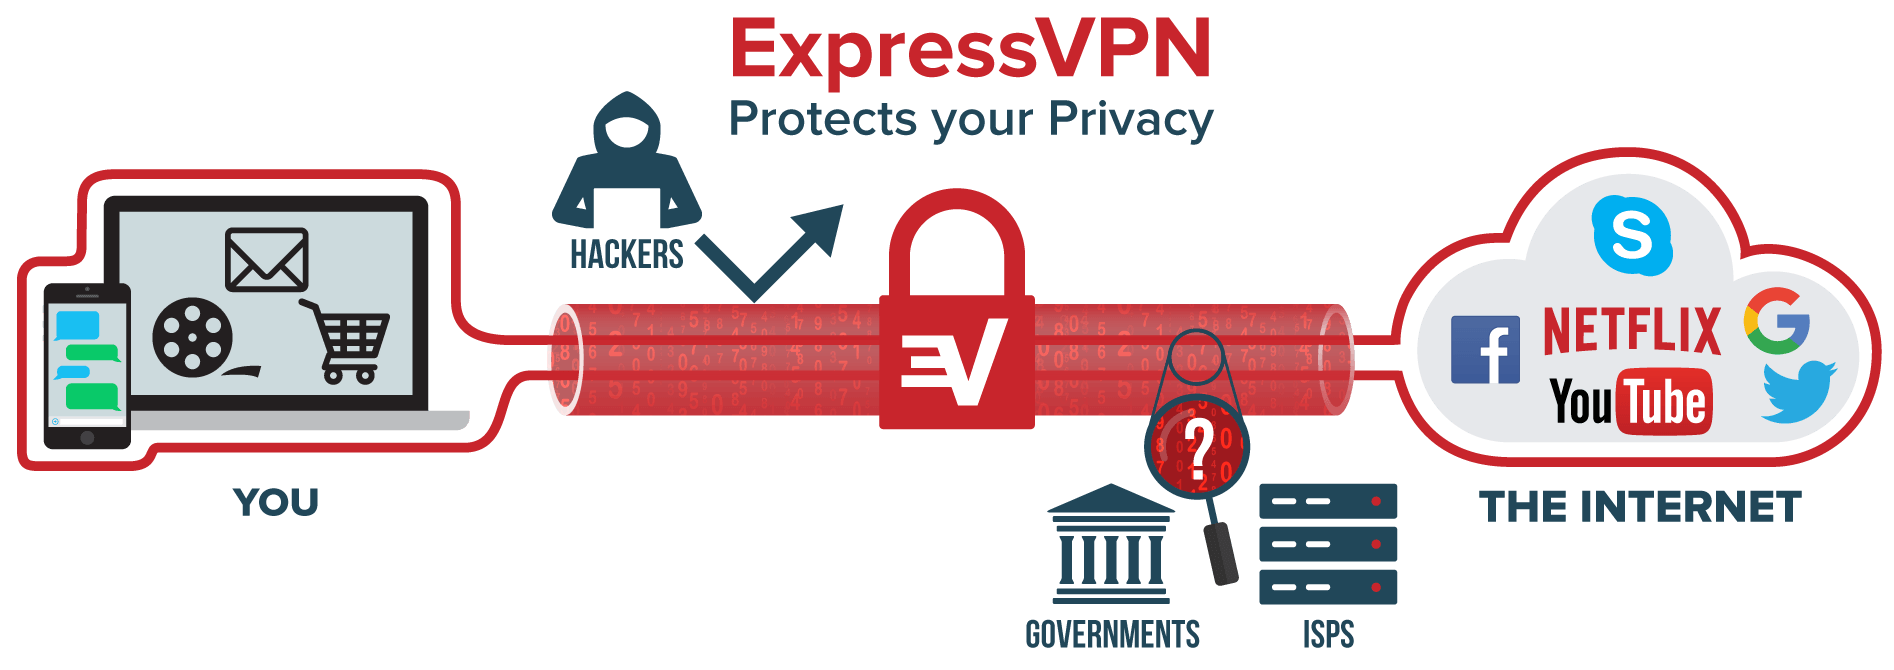 Express VPN The People Are the Heroes Now